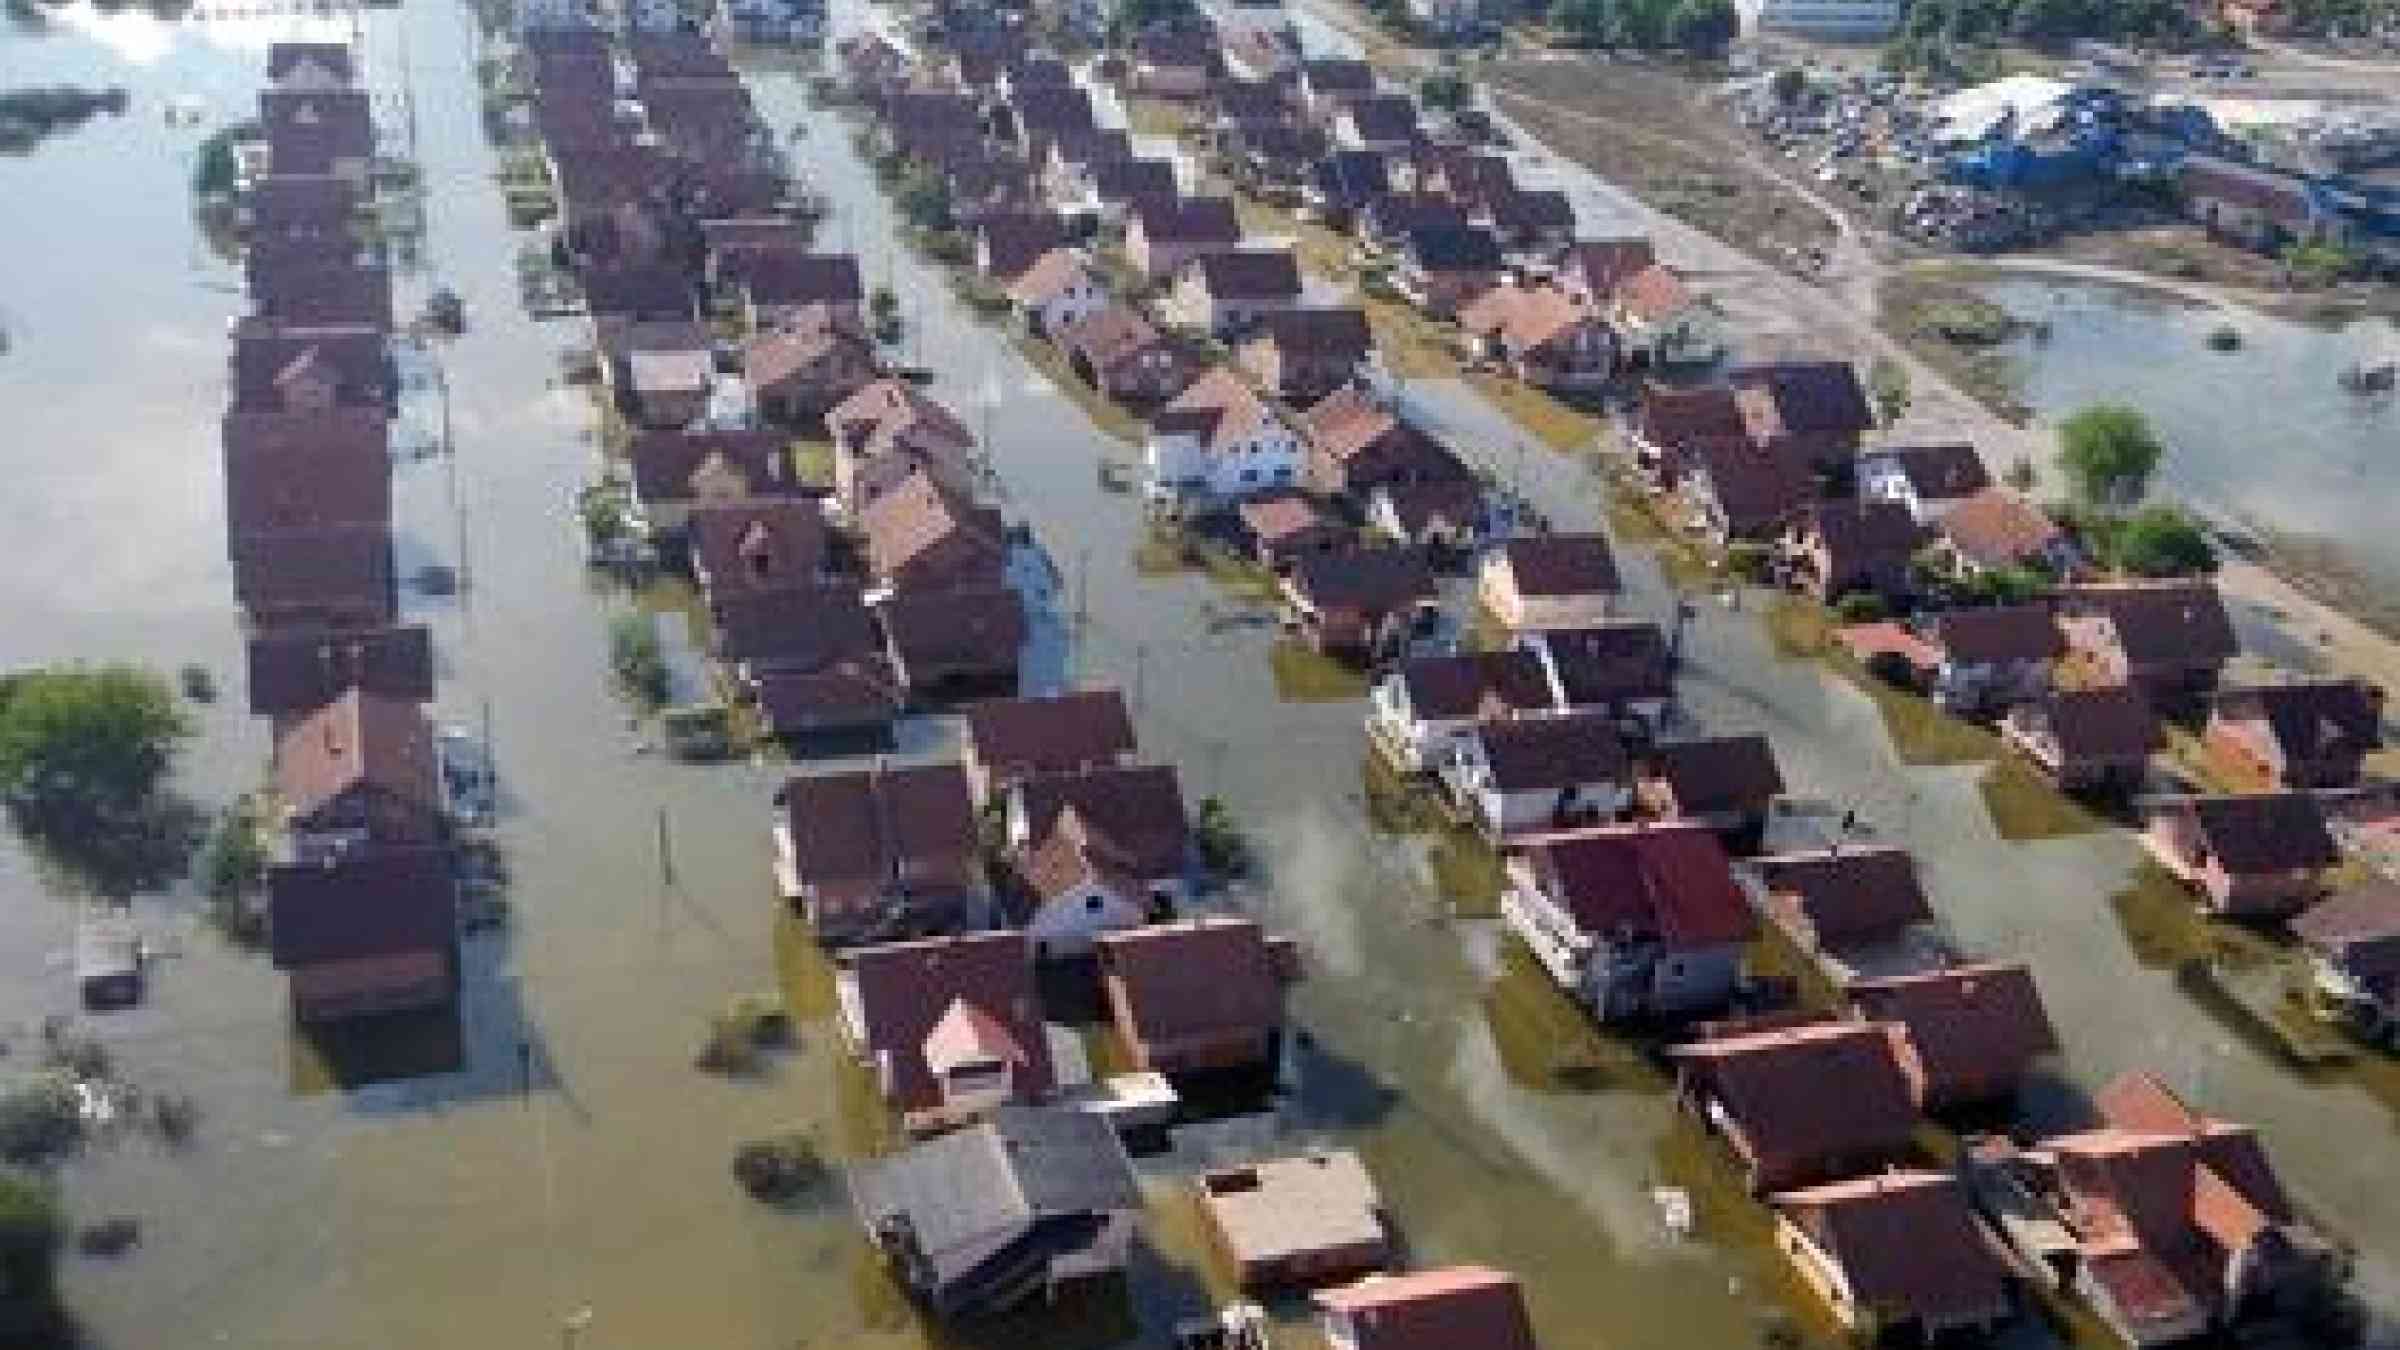 The devastating floods in Serbia in May 2014 caused the country to re-think its disaster risk insurance policies.